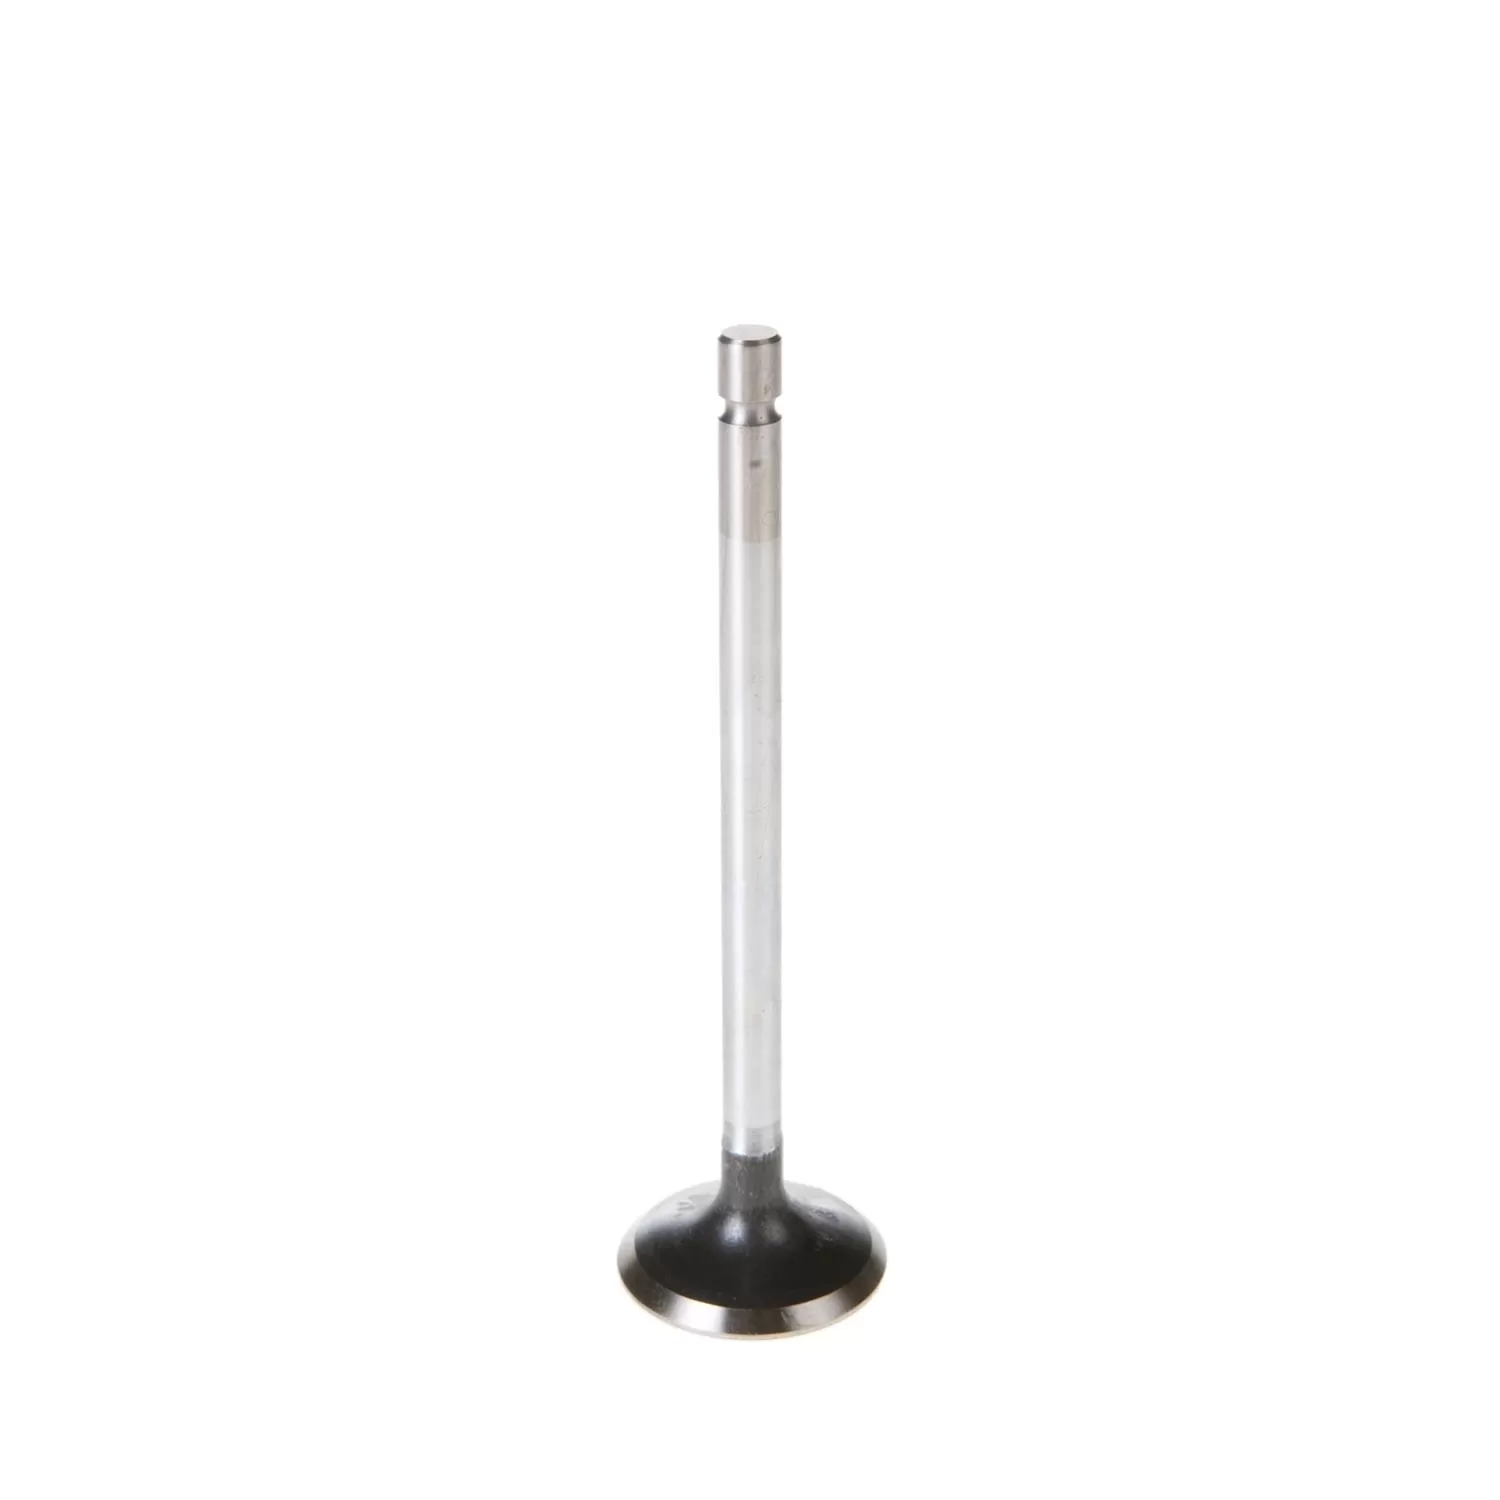 Melling Stock Replacement Intake Valve - V5162